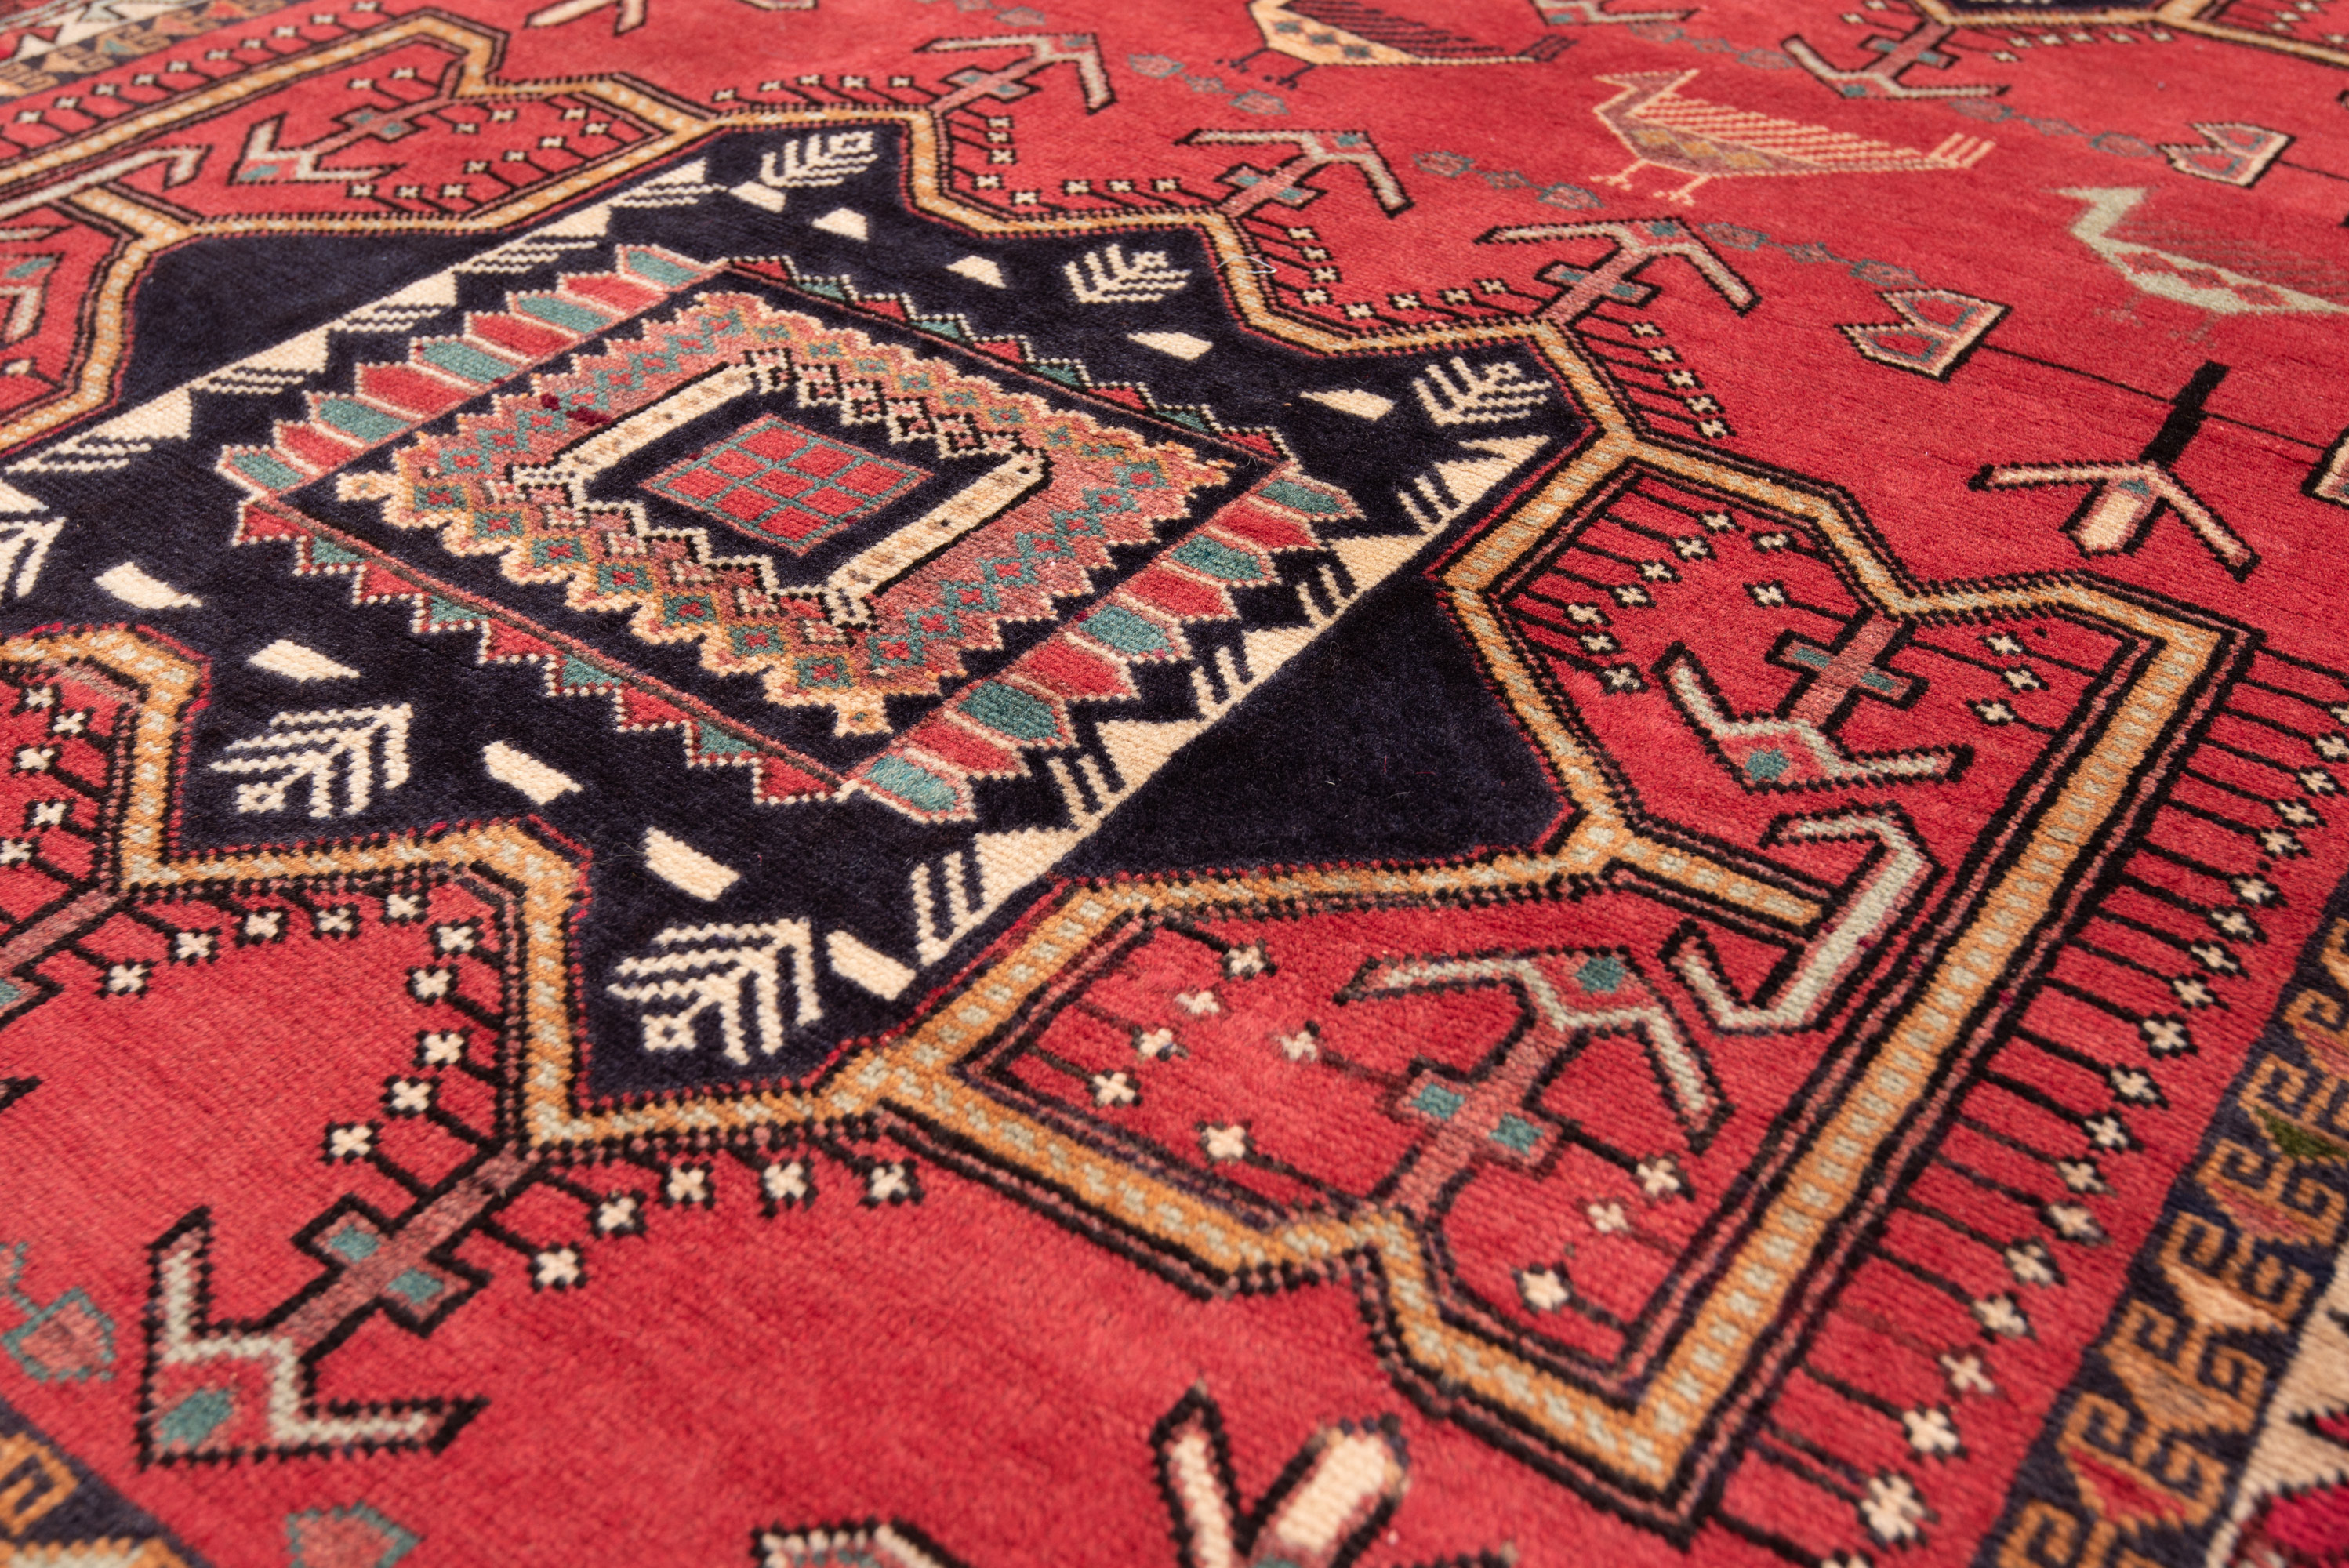 How To Tell A Persian Rug